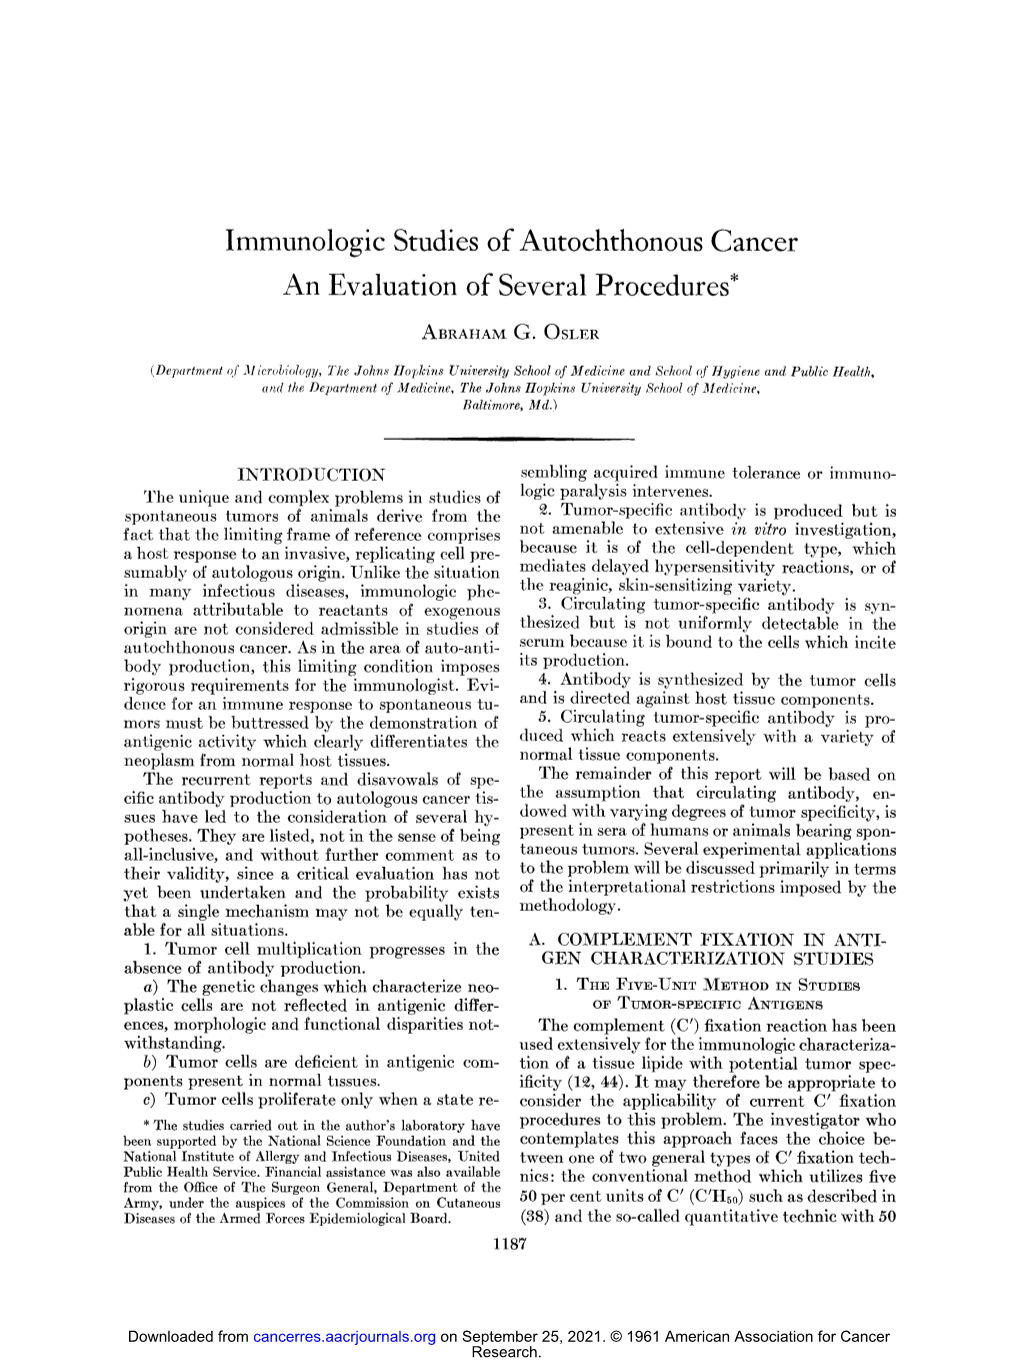 Immunologic Studies of Autochthonous Cancer an Evaluation of Several Procedures*